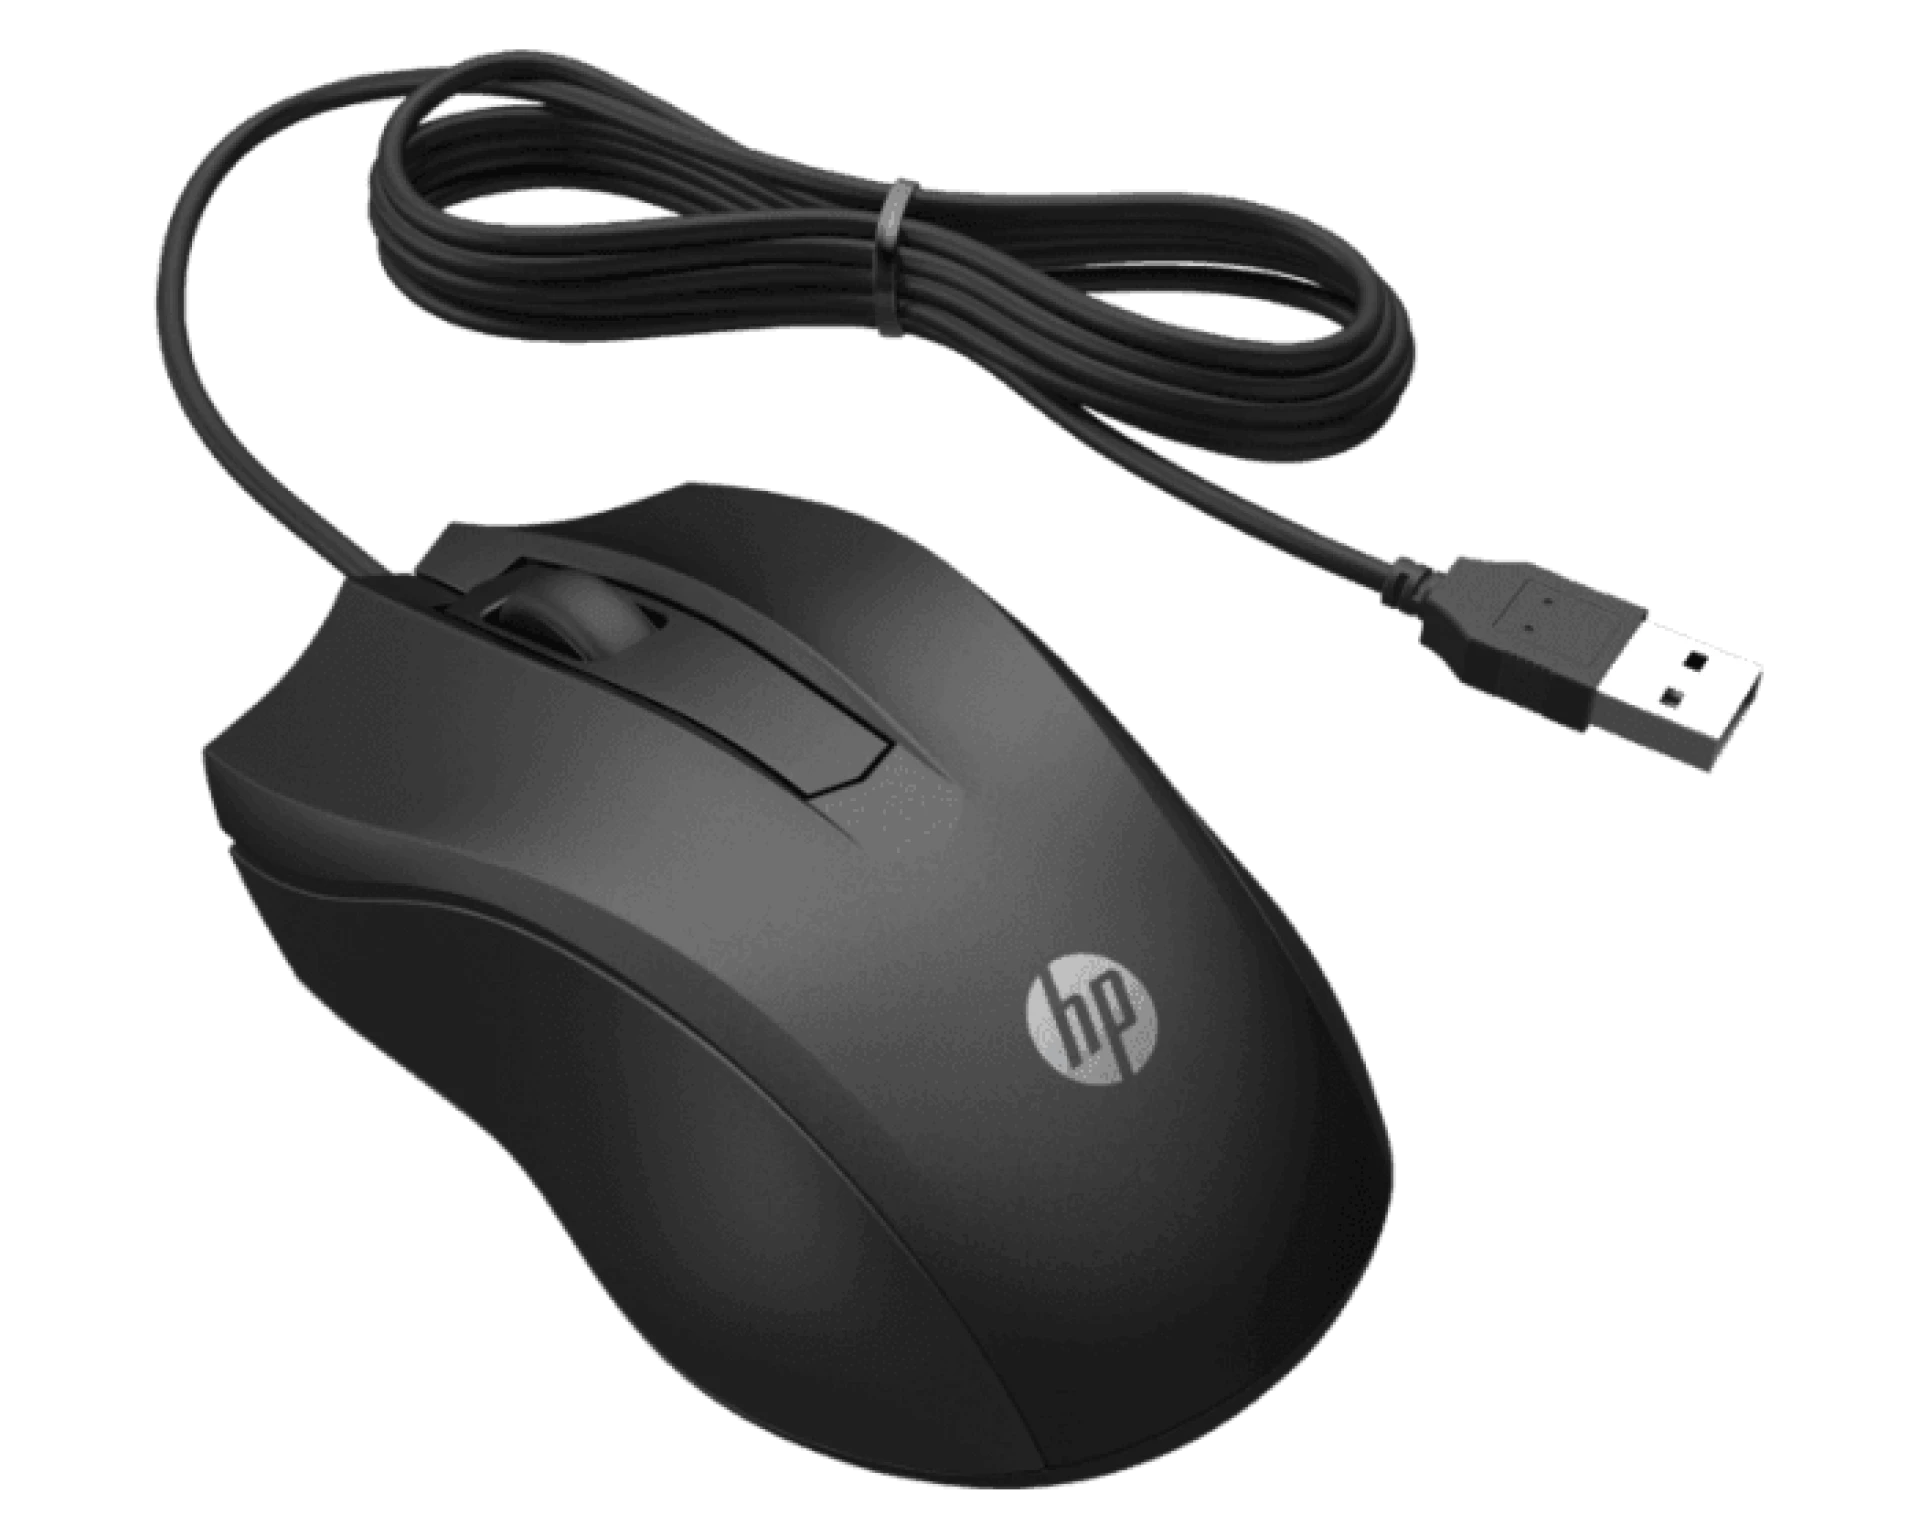 HP Wired Mouse 100 EURO MIS